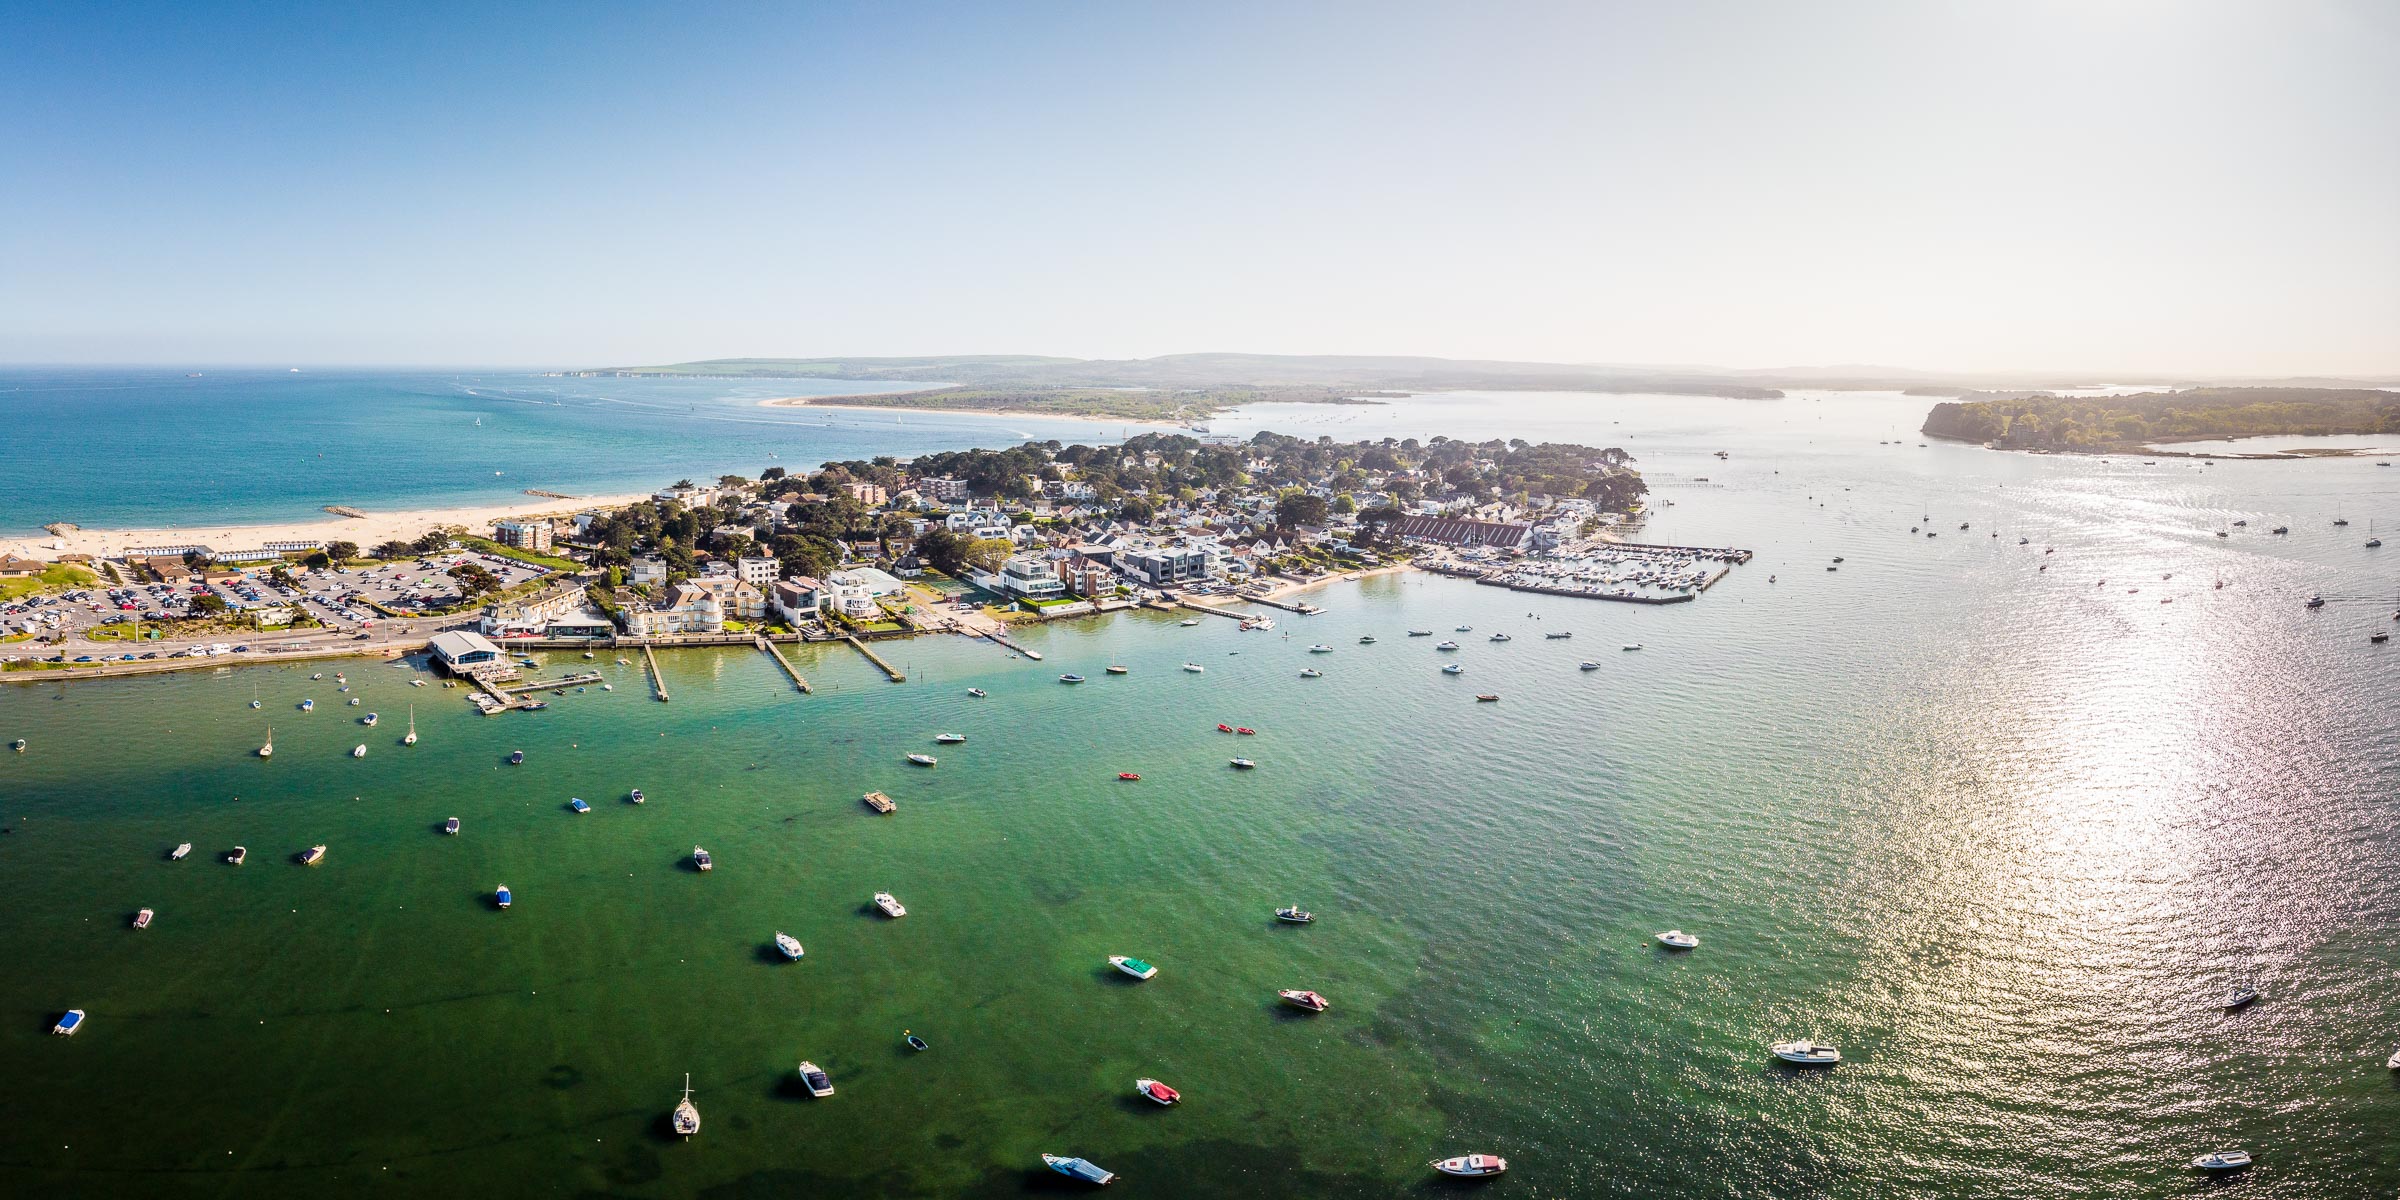 Sandbanks and Poole harbour in Dorset